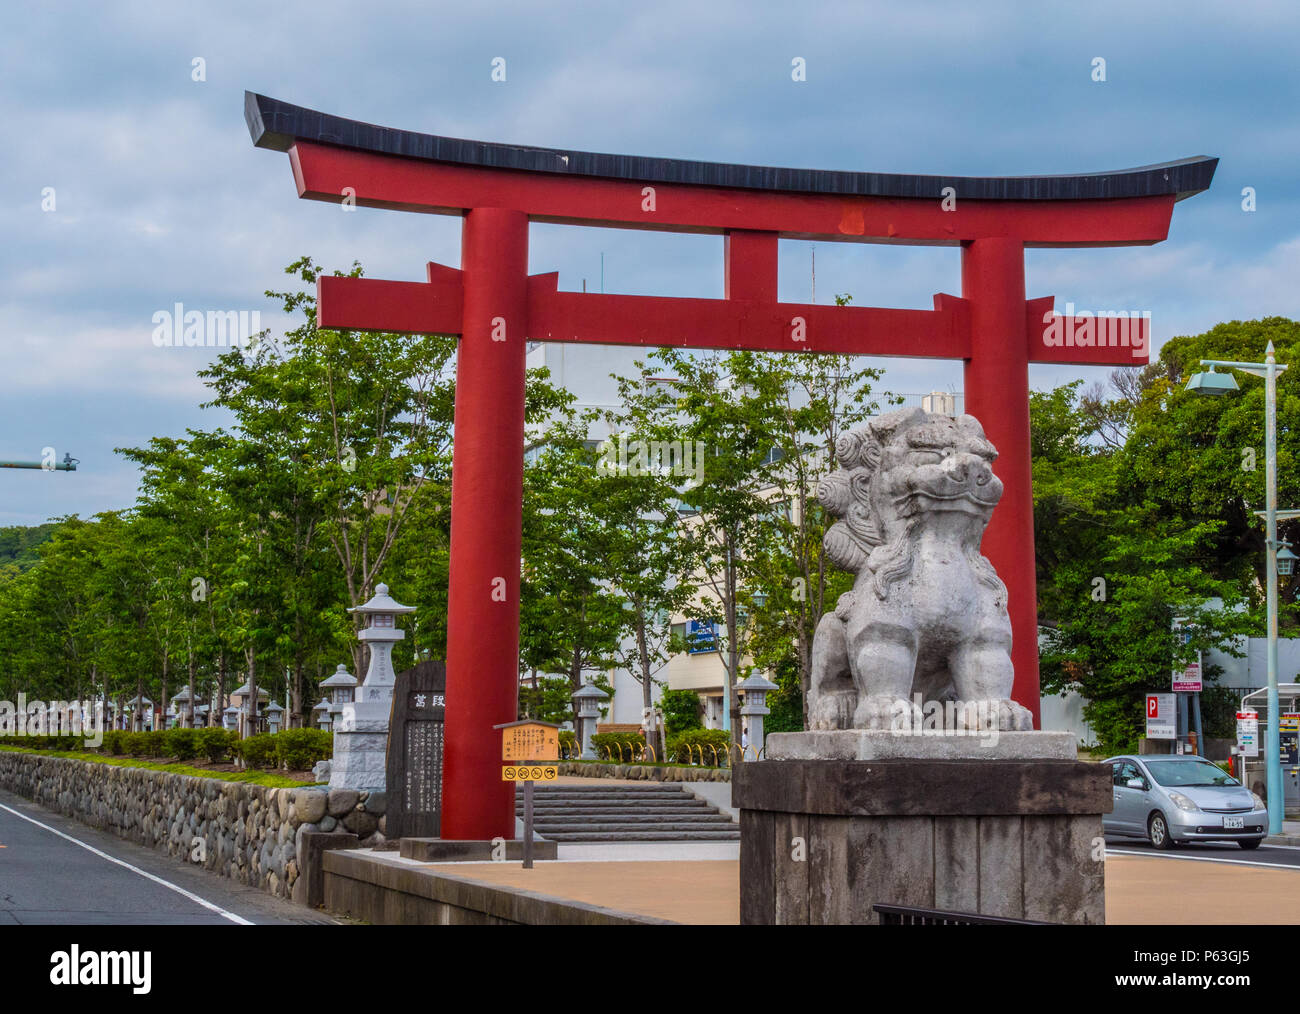 Typical Japanese Red Gate in the Streets of Kamakura called Torii Gate - TOKYO / JAPAN - JUNE 12, 2018 Stock Photo